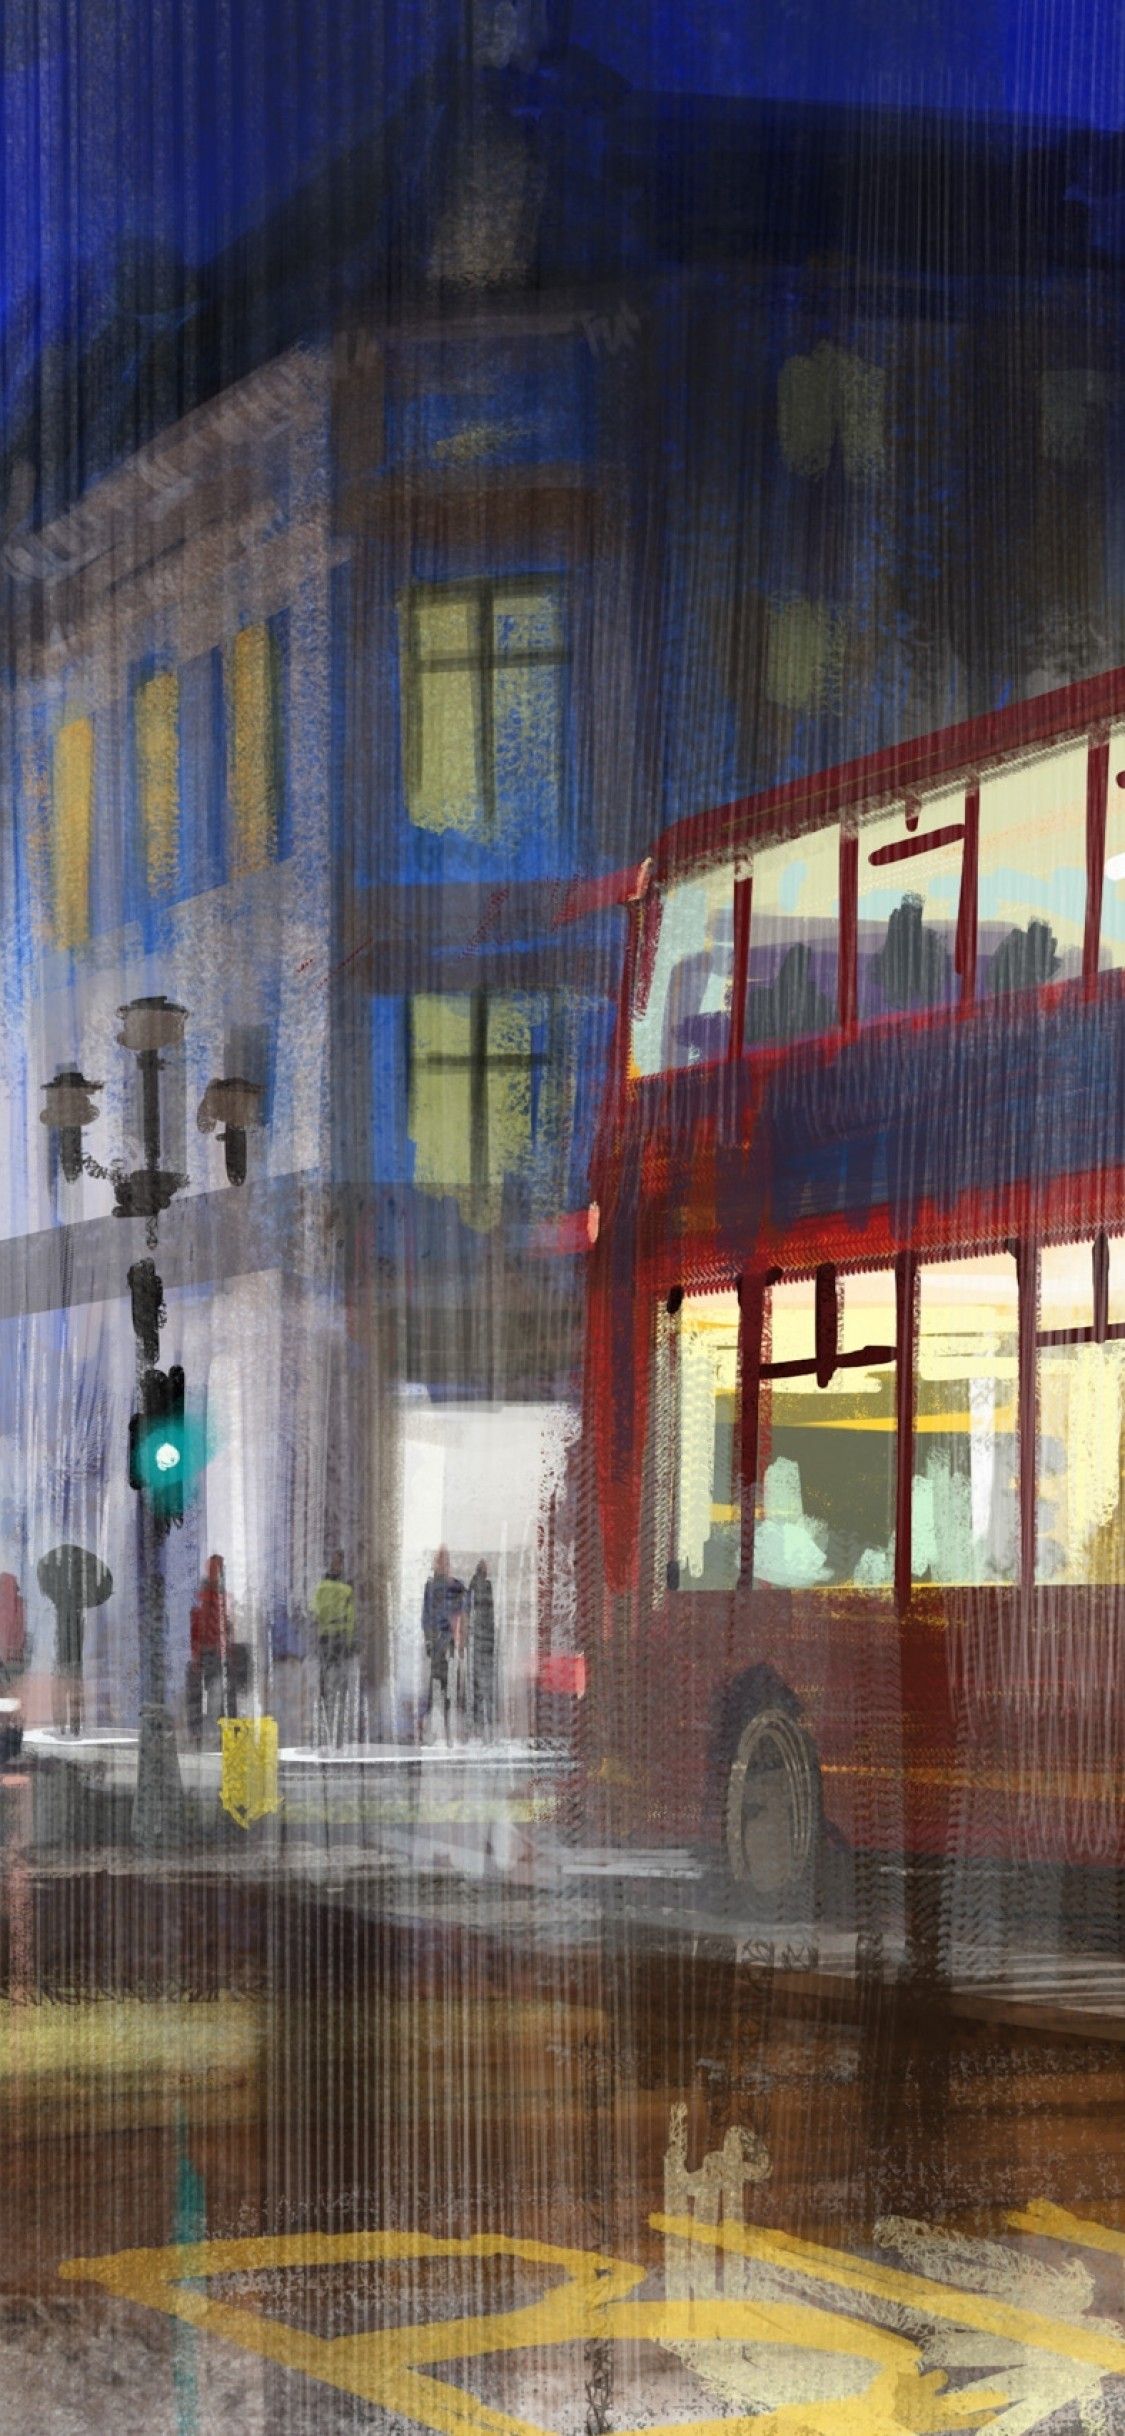 Download 1125x2436 London, Artistic, Raining, Bus, Hoodie, City Wallpaper for iPhone 11 Pro & X